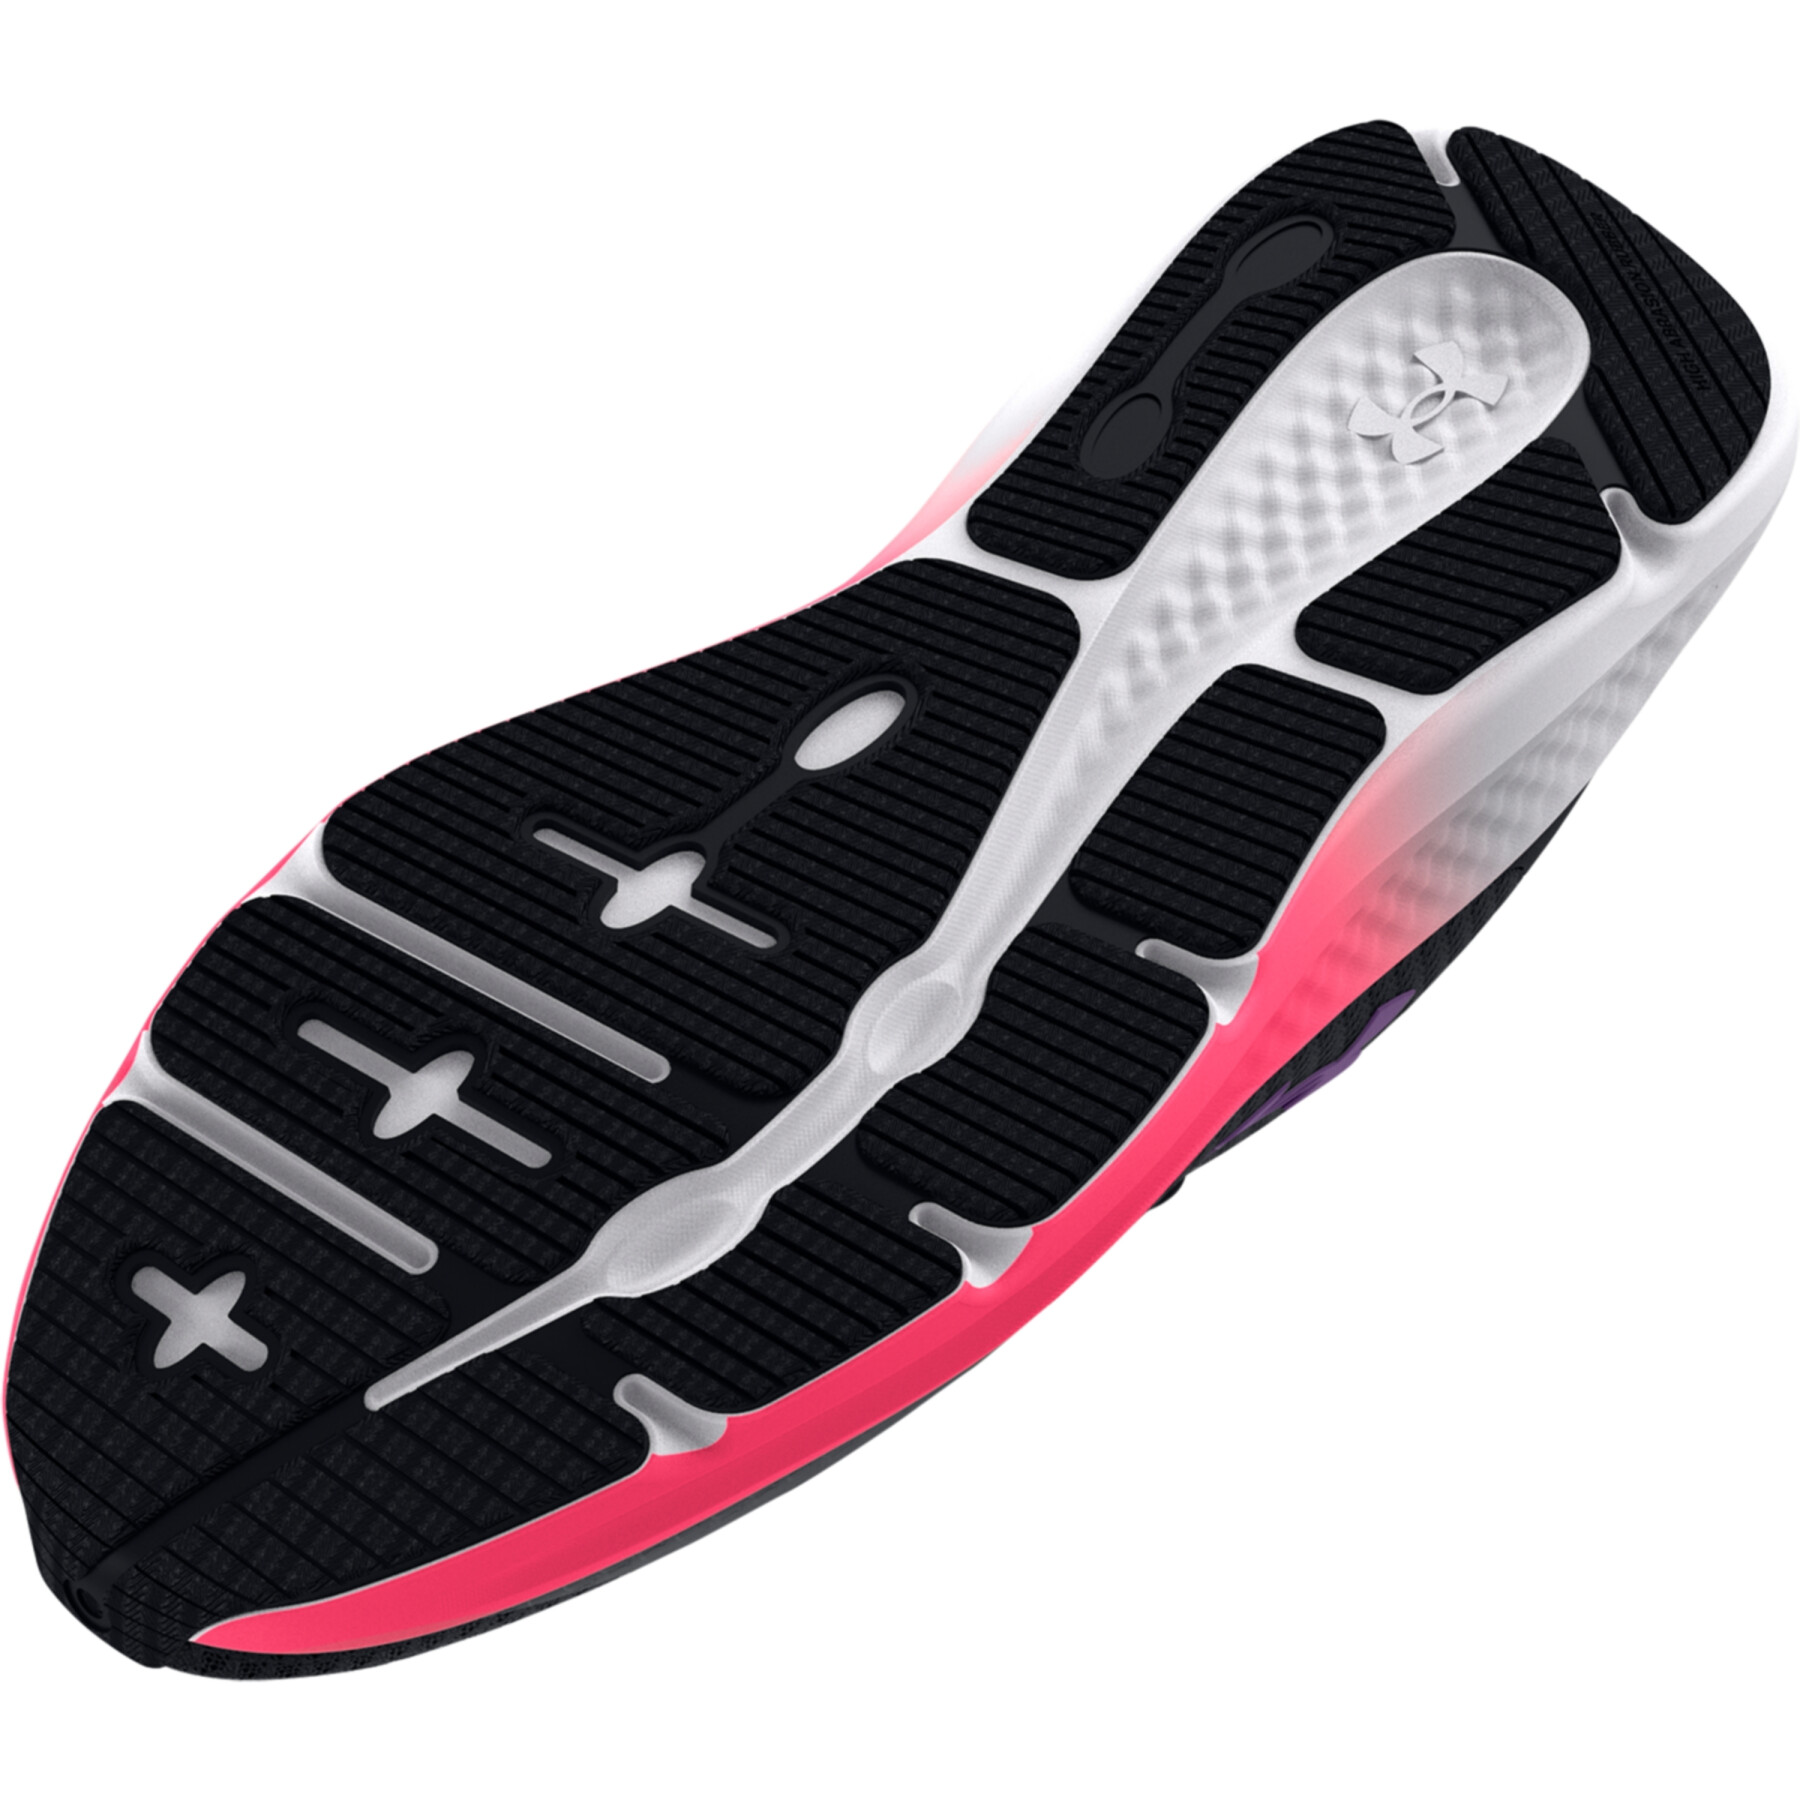 Chaussures de running femme Under Armour Charged Pursuit 3